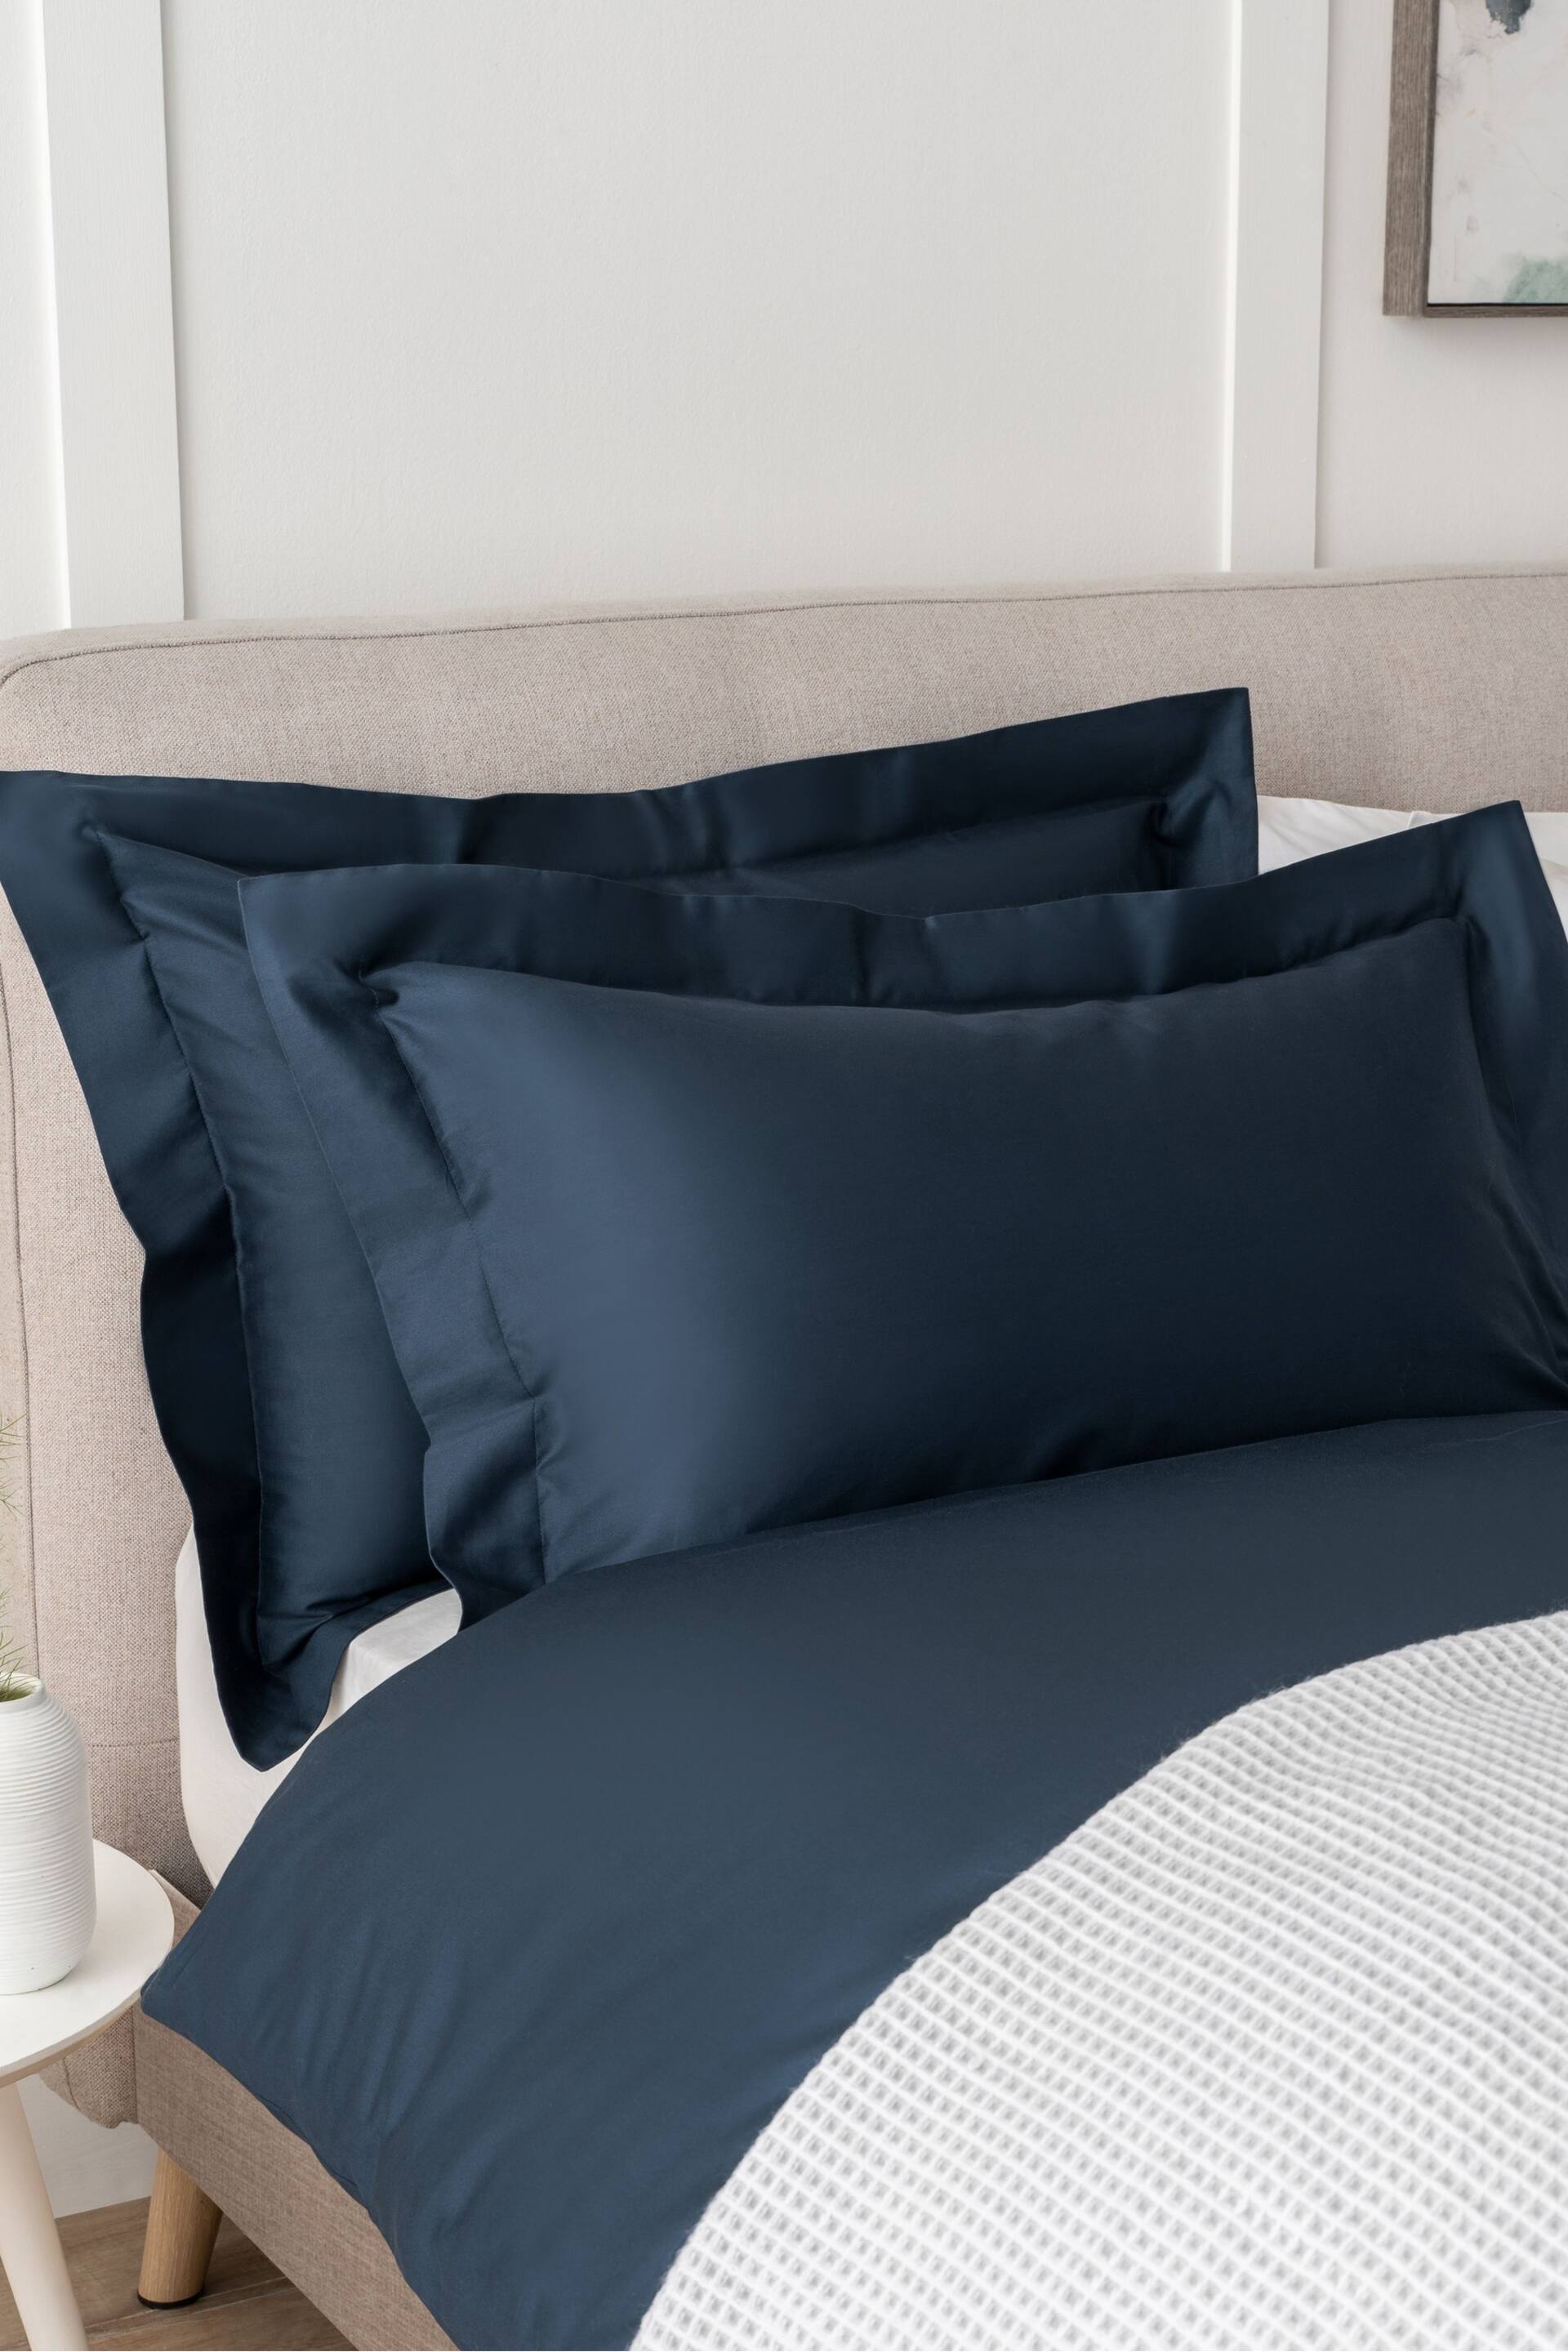 Set of 2 Navy Collection Luxe 400 Thread Count 100% Egyptian Cotton Pillowcases - Image 1 of 3